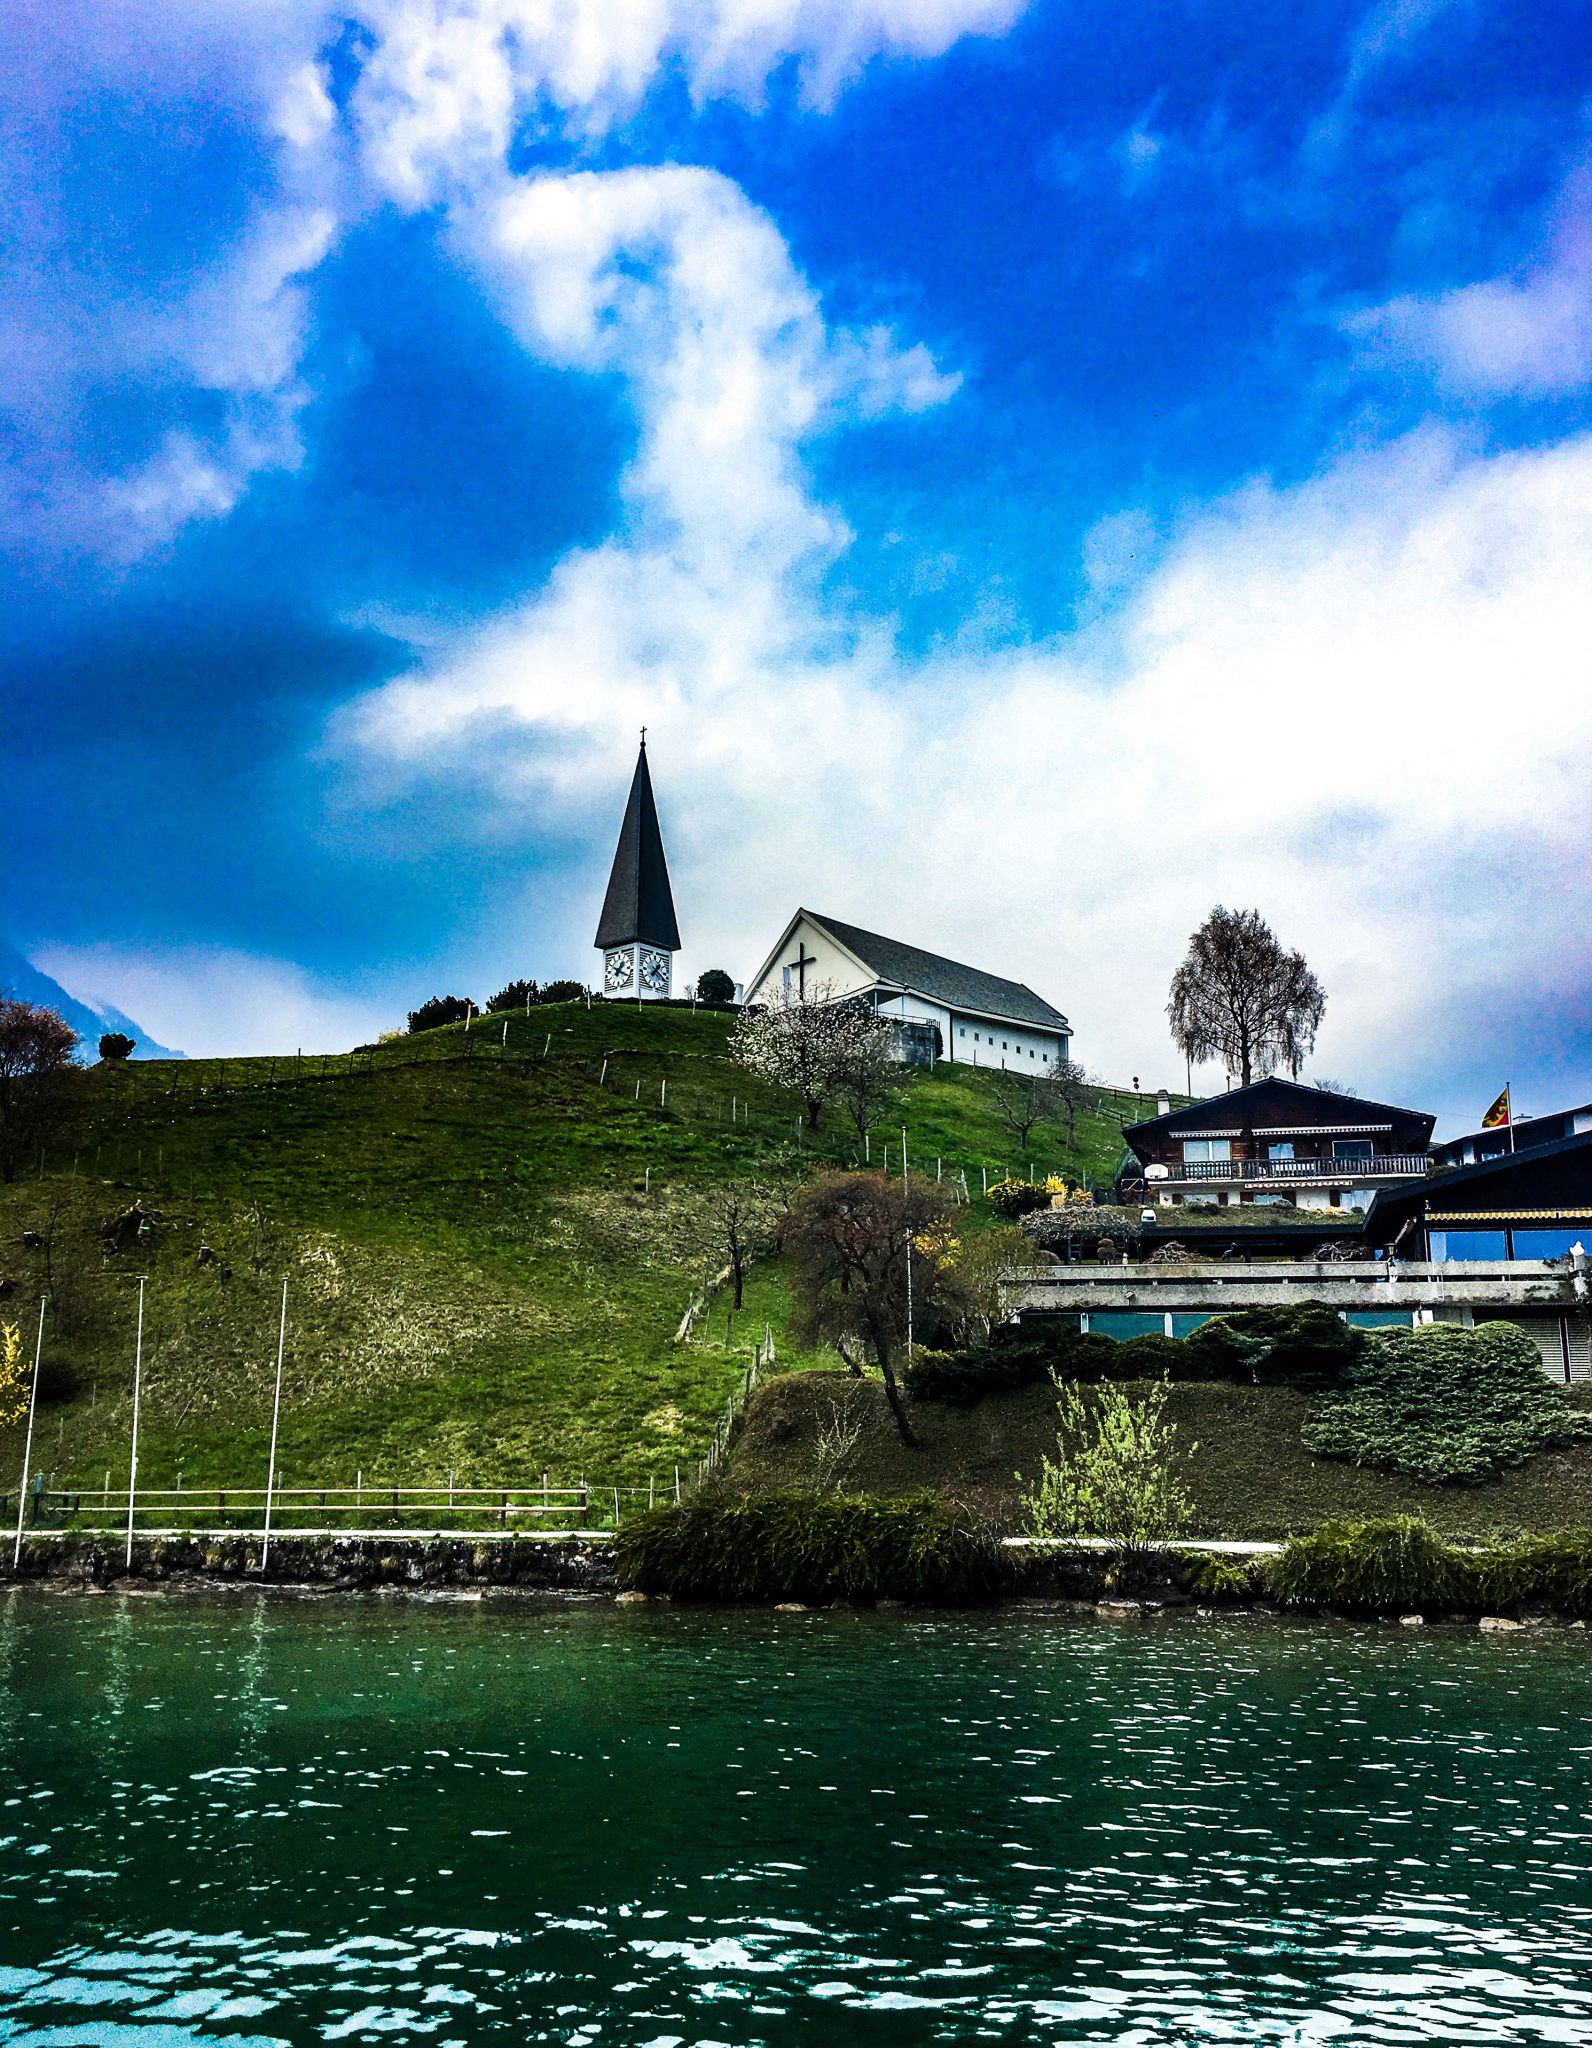 Villages on the way to Thun